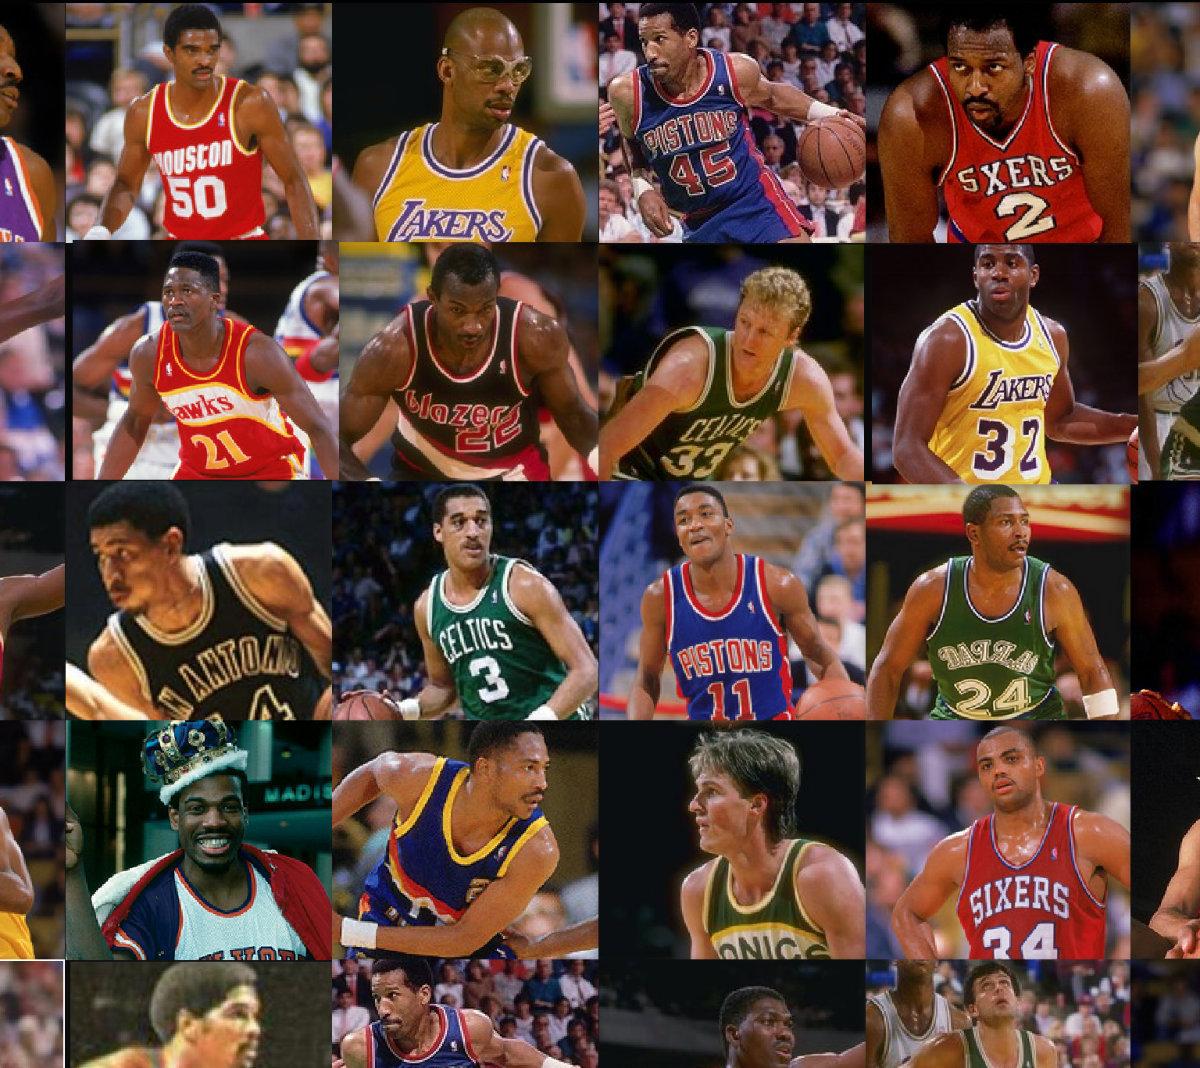 Dream Team 25: A Look Back at the Greatest Basketball Team Ever